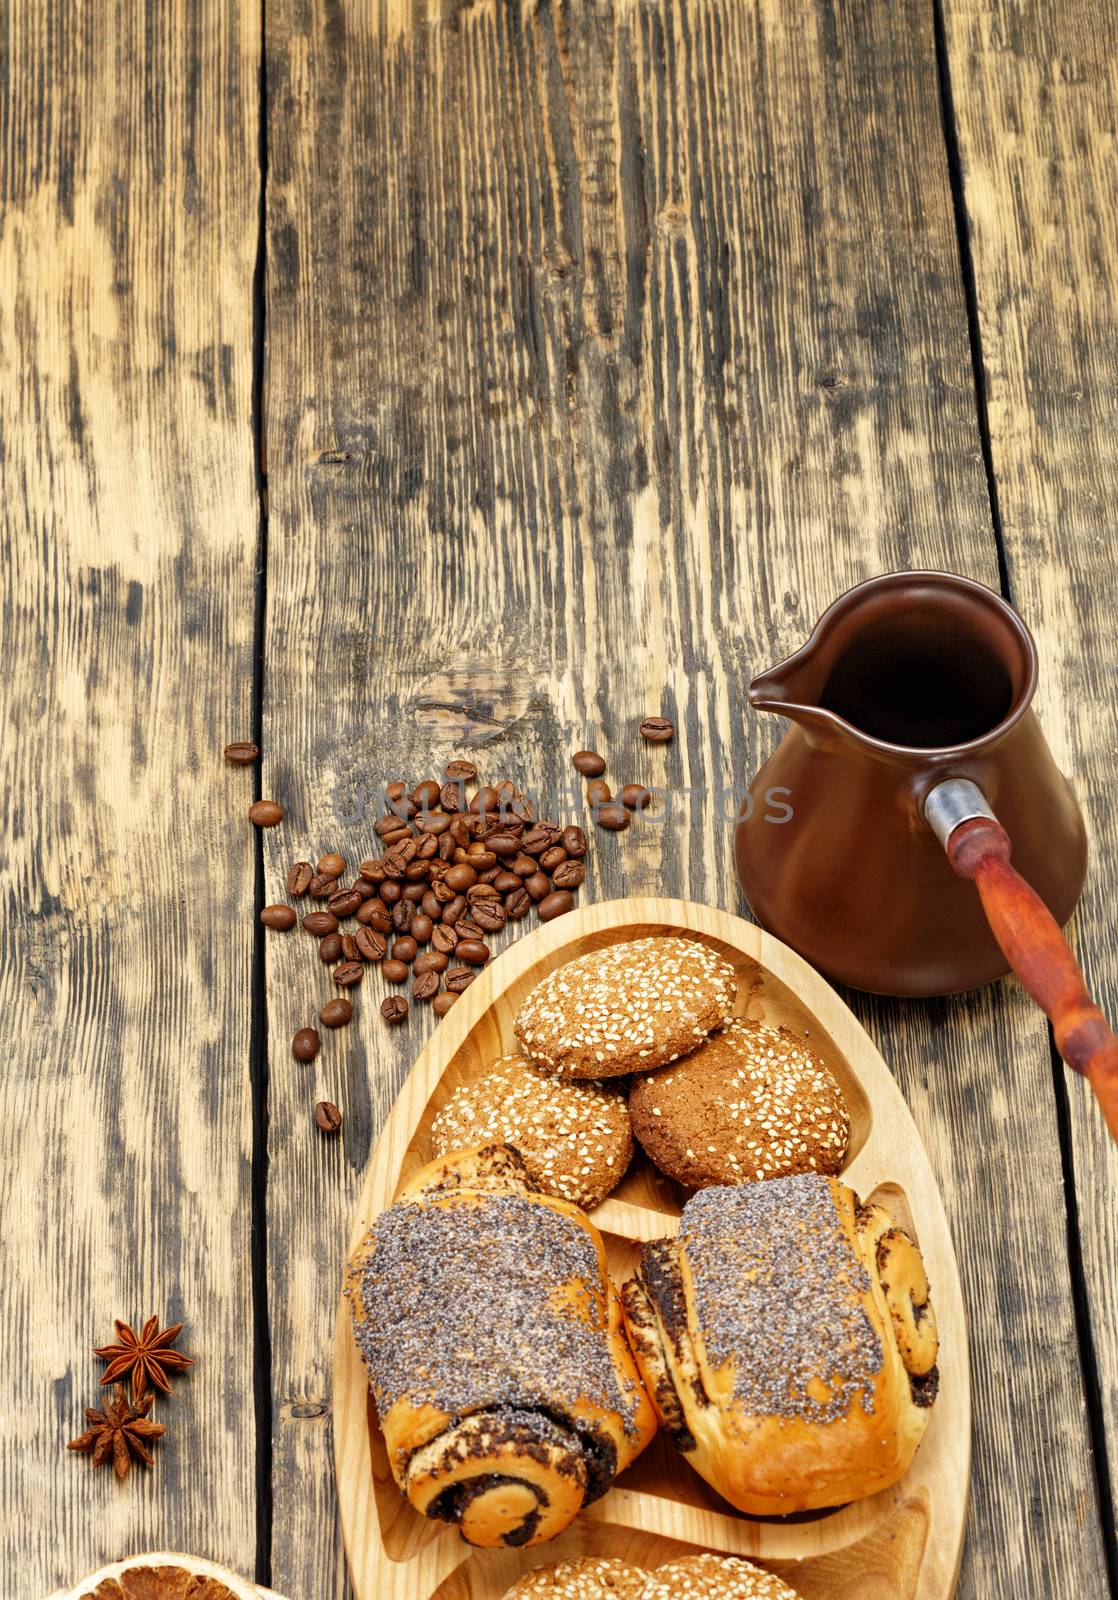 Coffee beans are scattered on an old wooden table next to dried slices of orange, anise stars, next to a coffee teapot and homemade fresh buns in slight blur.